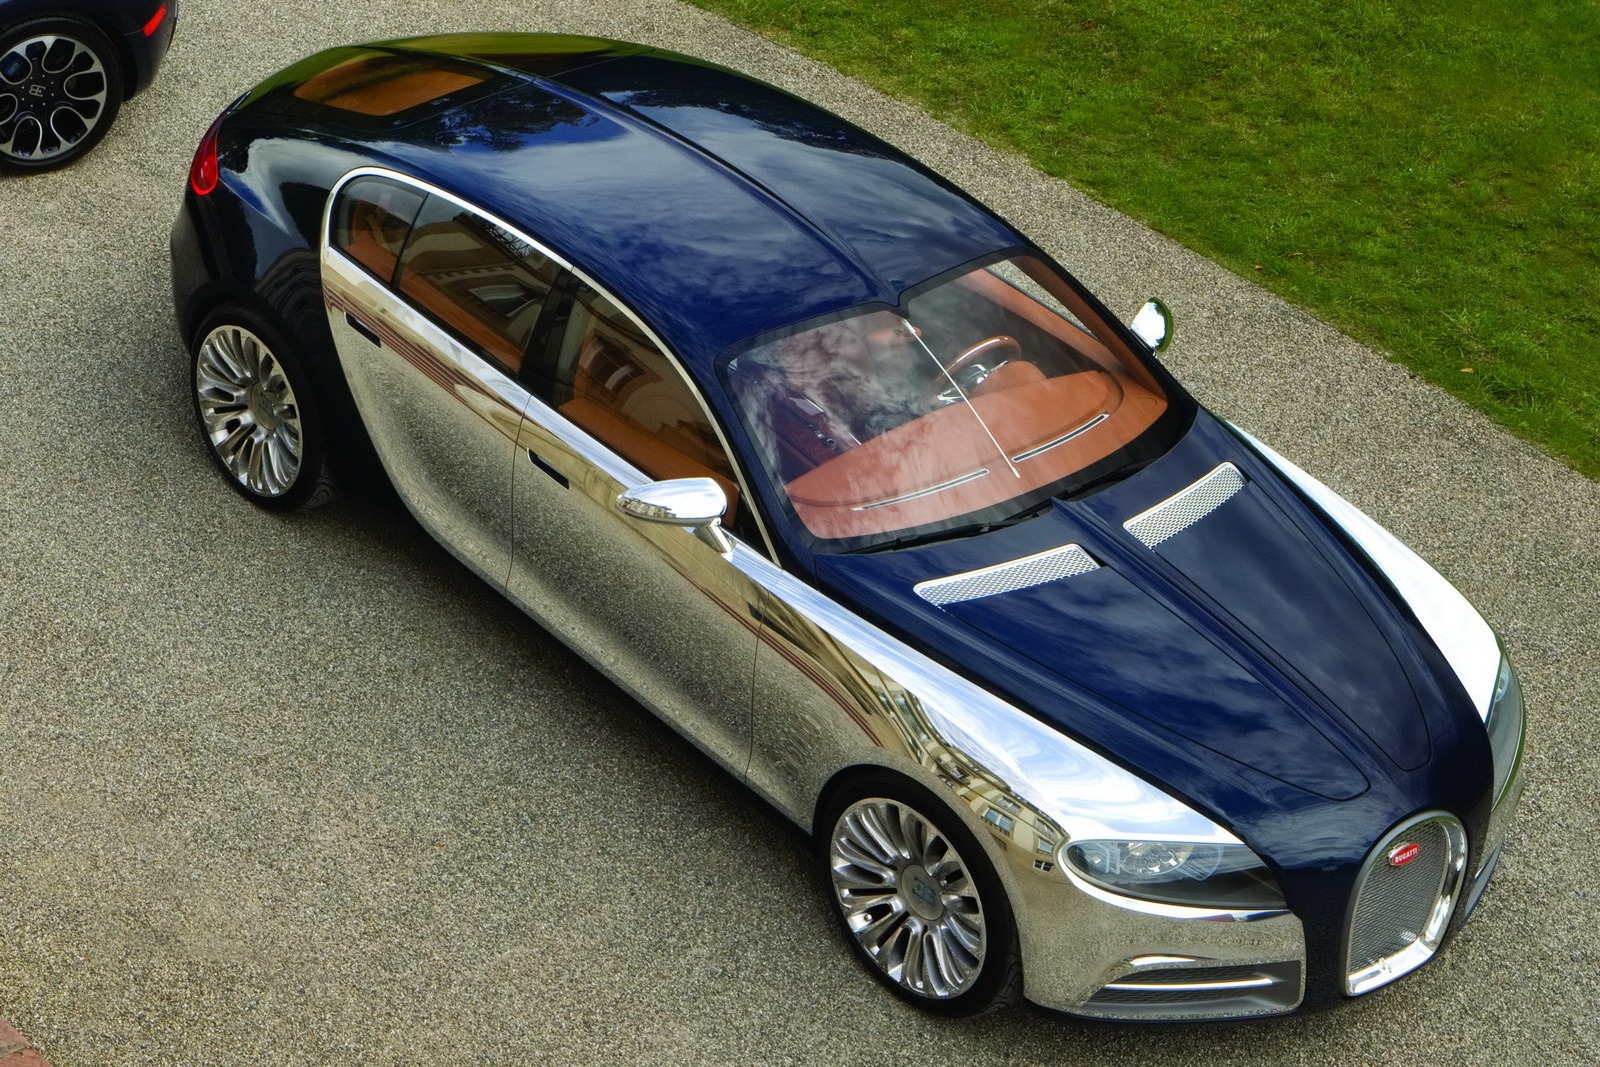 Four Door Limousine Might Follow Bugatti Chiron Carscoops